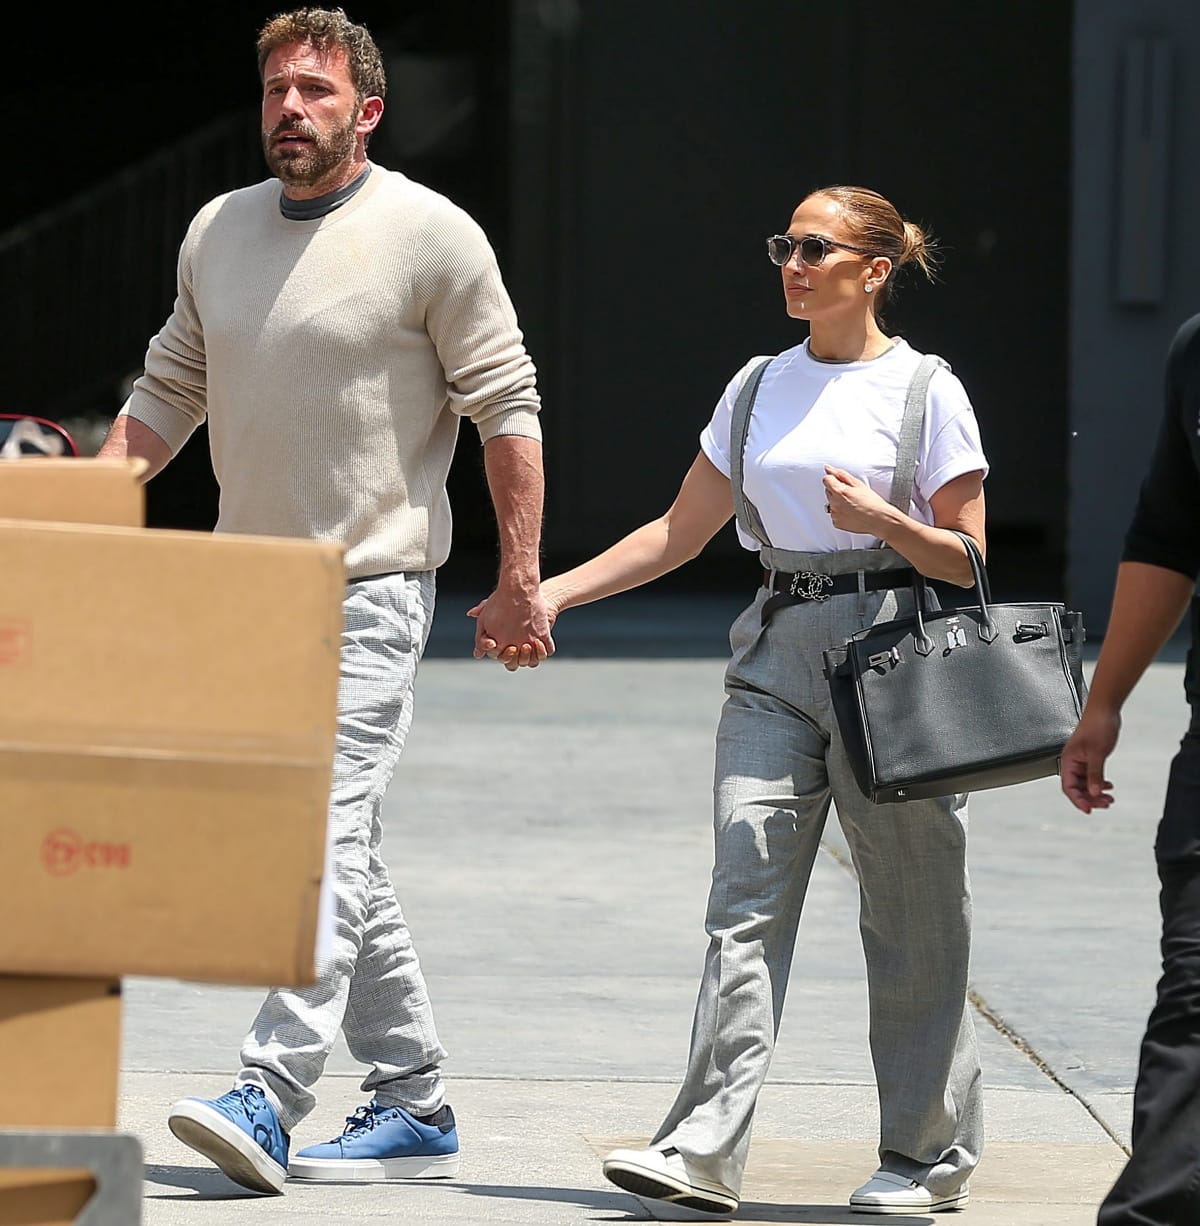 Ben Affleck and Jennifer Lopez holding hands outside the RED Studios in Hollywood